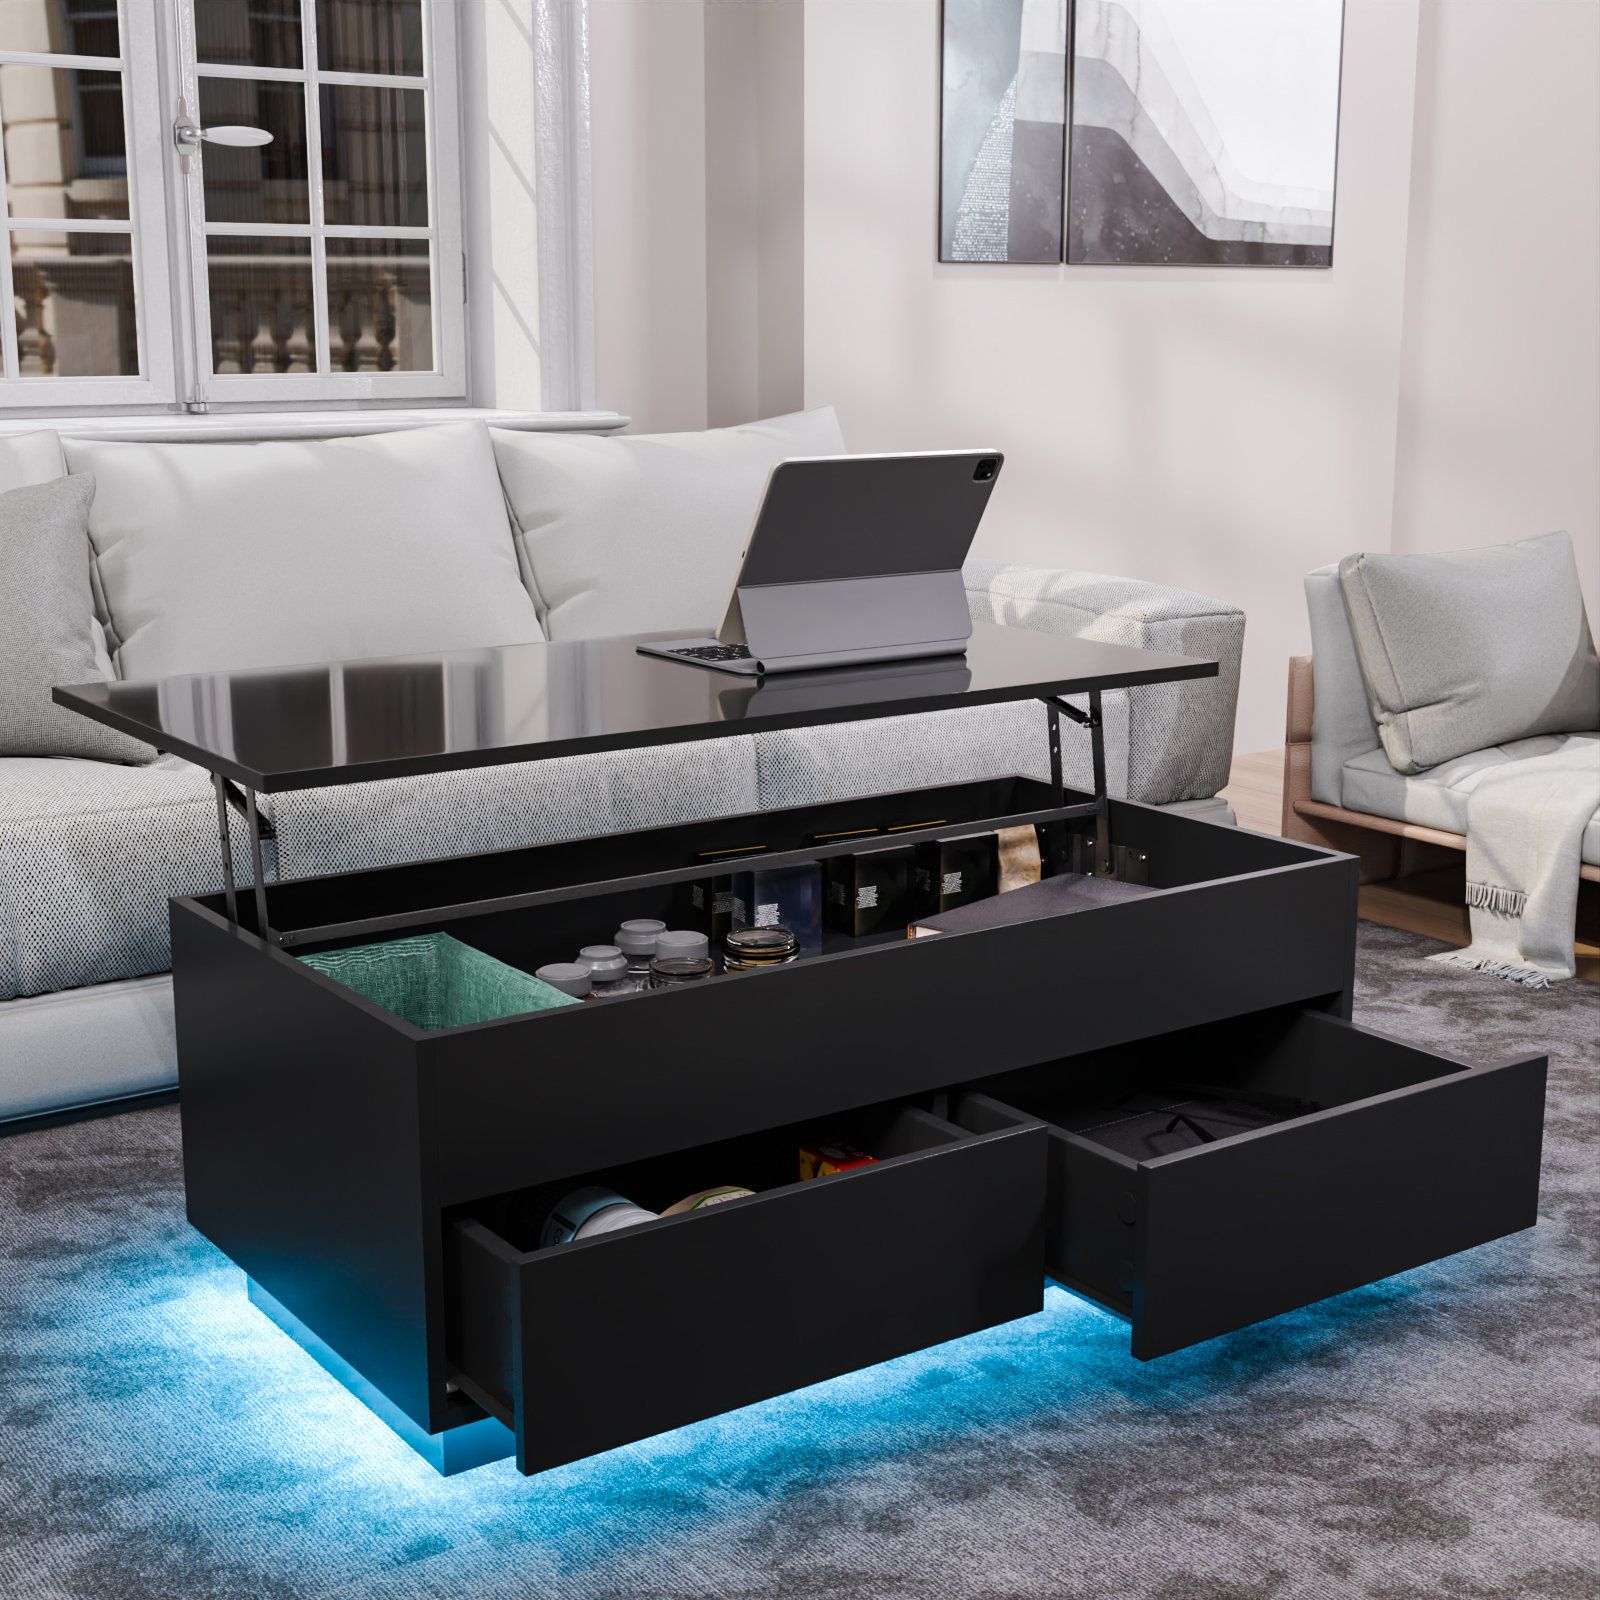 Wrought Studio Ellysse Lift Top Coffee Table With Multifunctional Rgb Led  Lights, Hidden Compartment And Drawers & Reviews – Wayfair Canada Within Modern Coffee Tables With Hidden Storage Compartments (View 9 of 15)